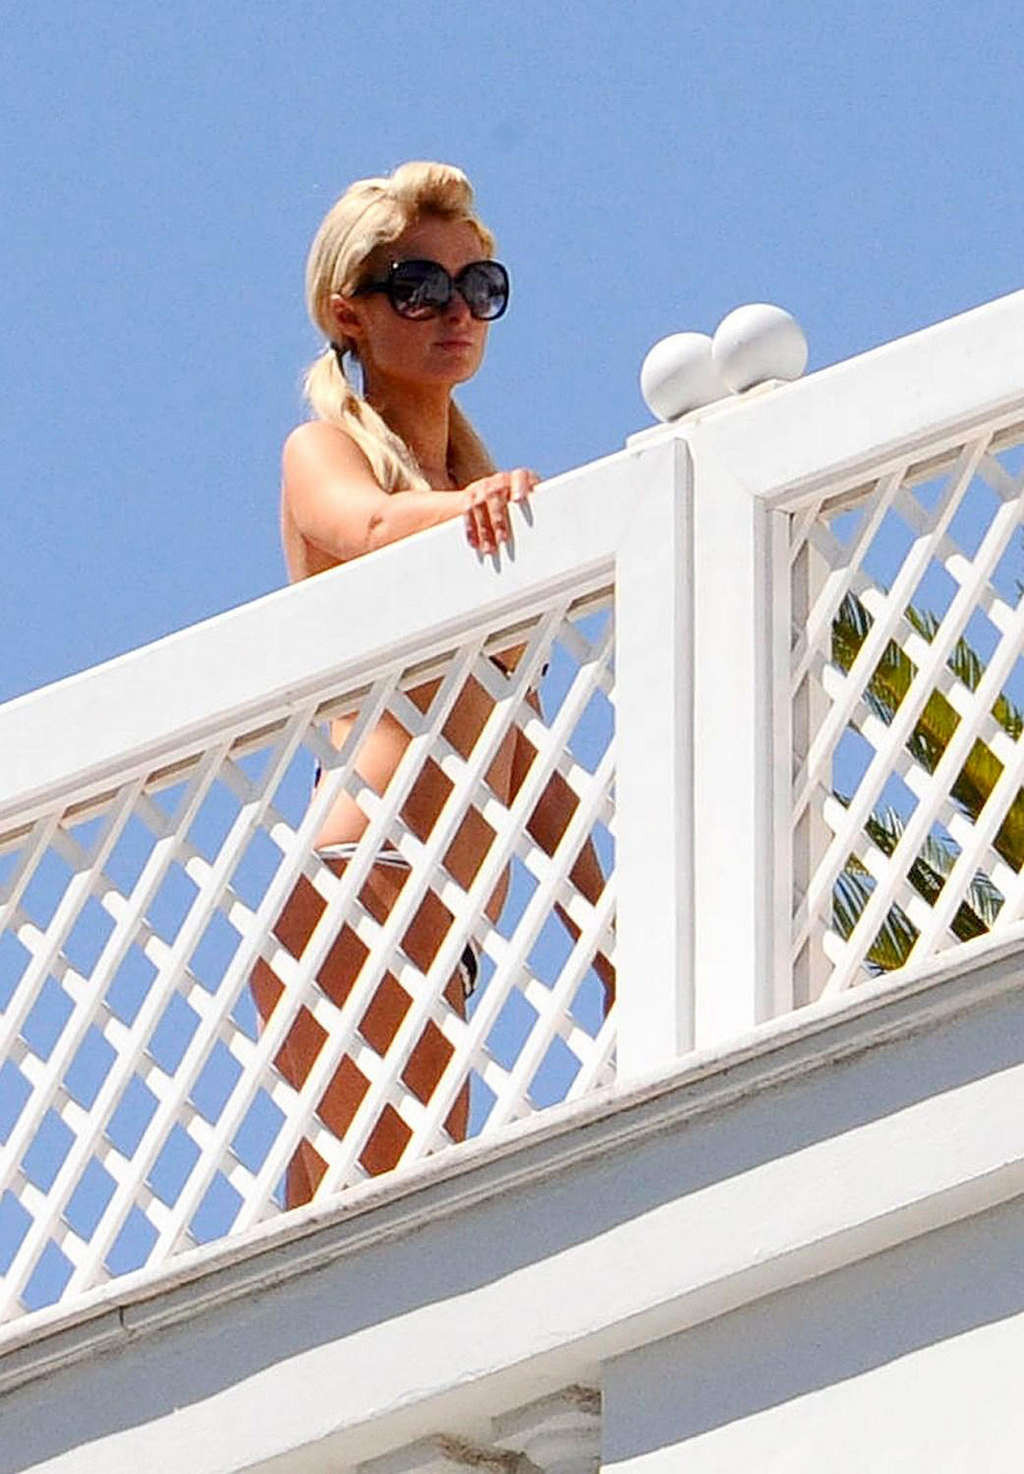 Paris Hilton showing her nice ass in thong on balcony and in see thru dress #75359841